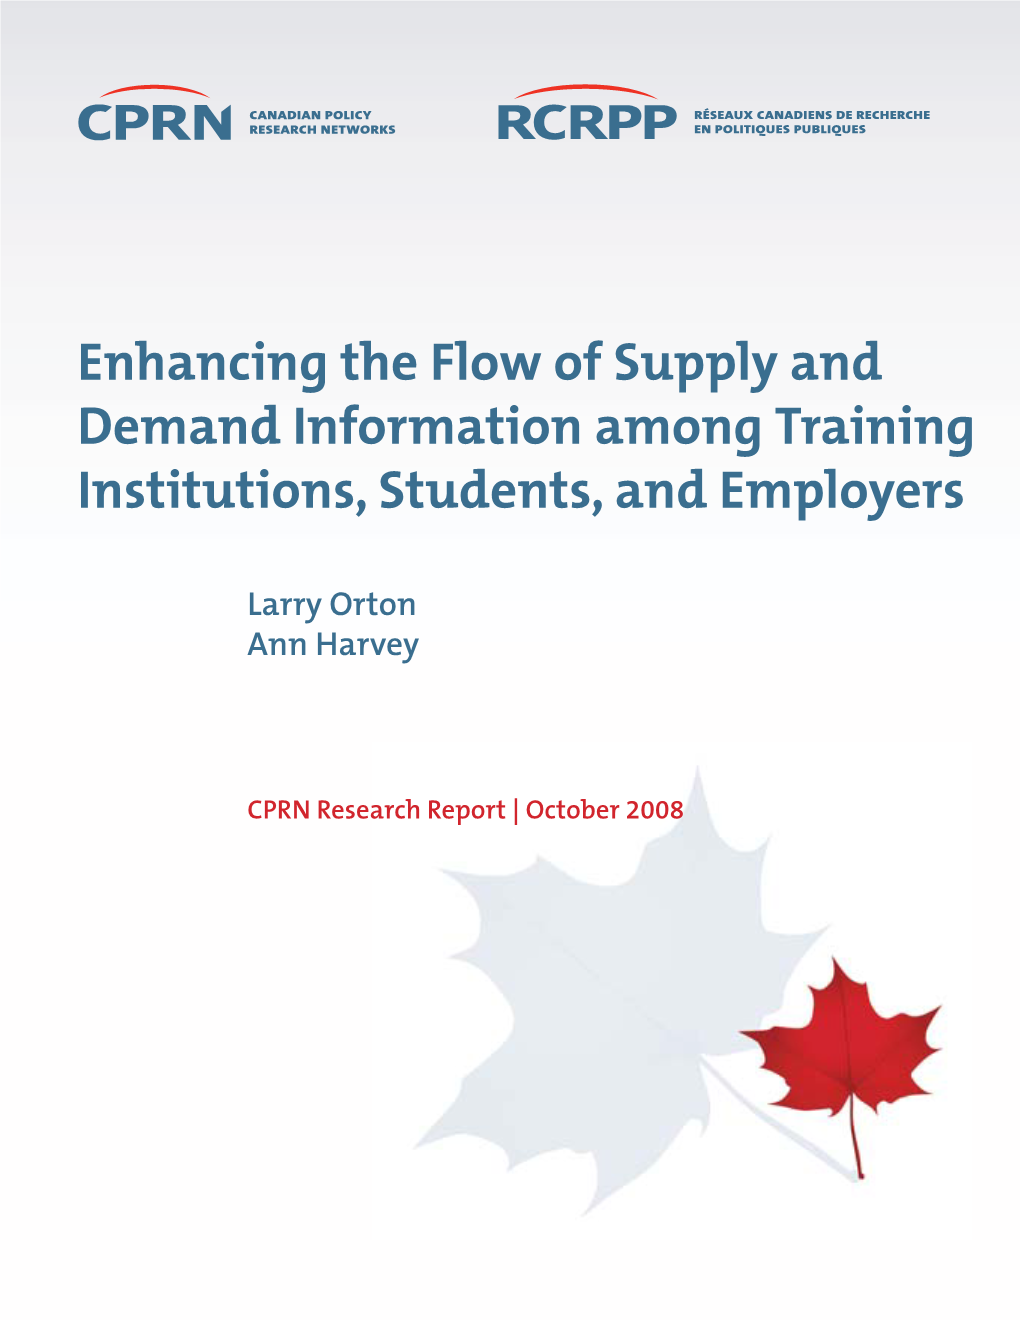 Enhancing the Flow of Supply and Demand Information Among Training Institutions, Students, and Employers